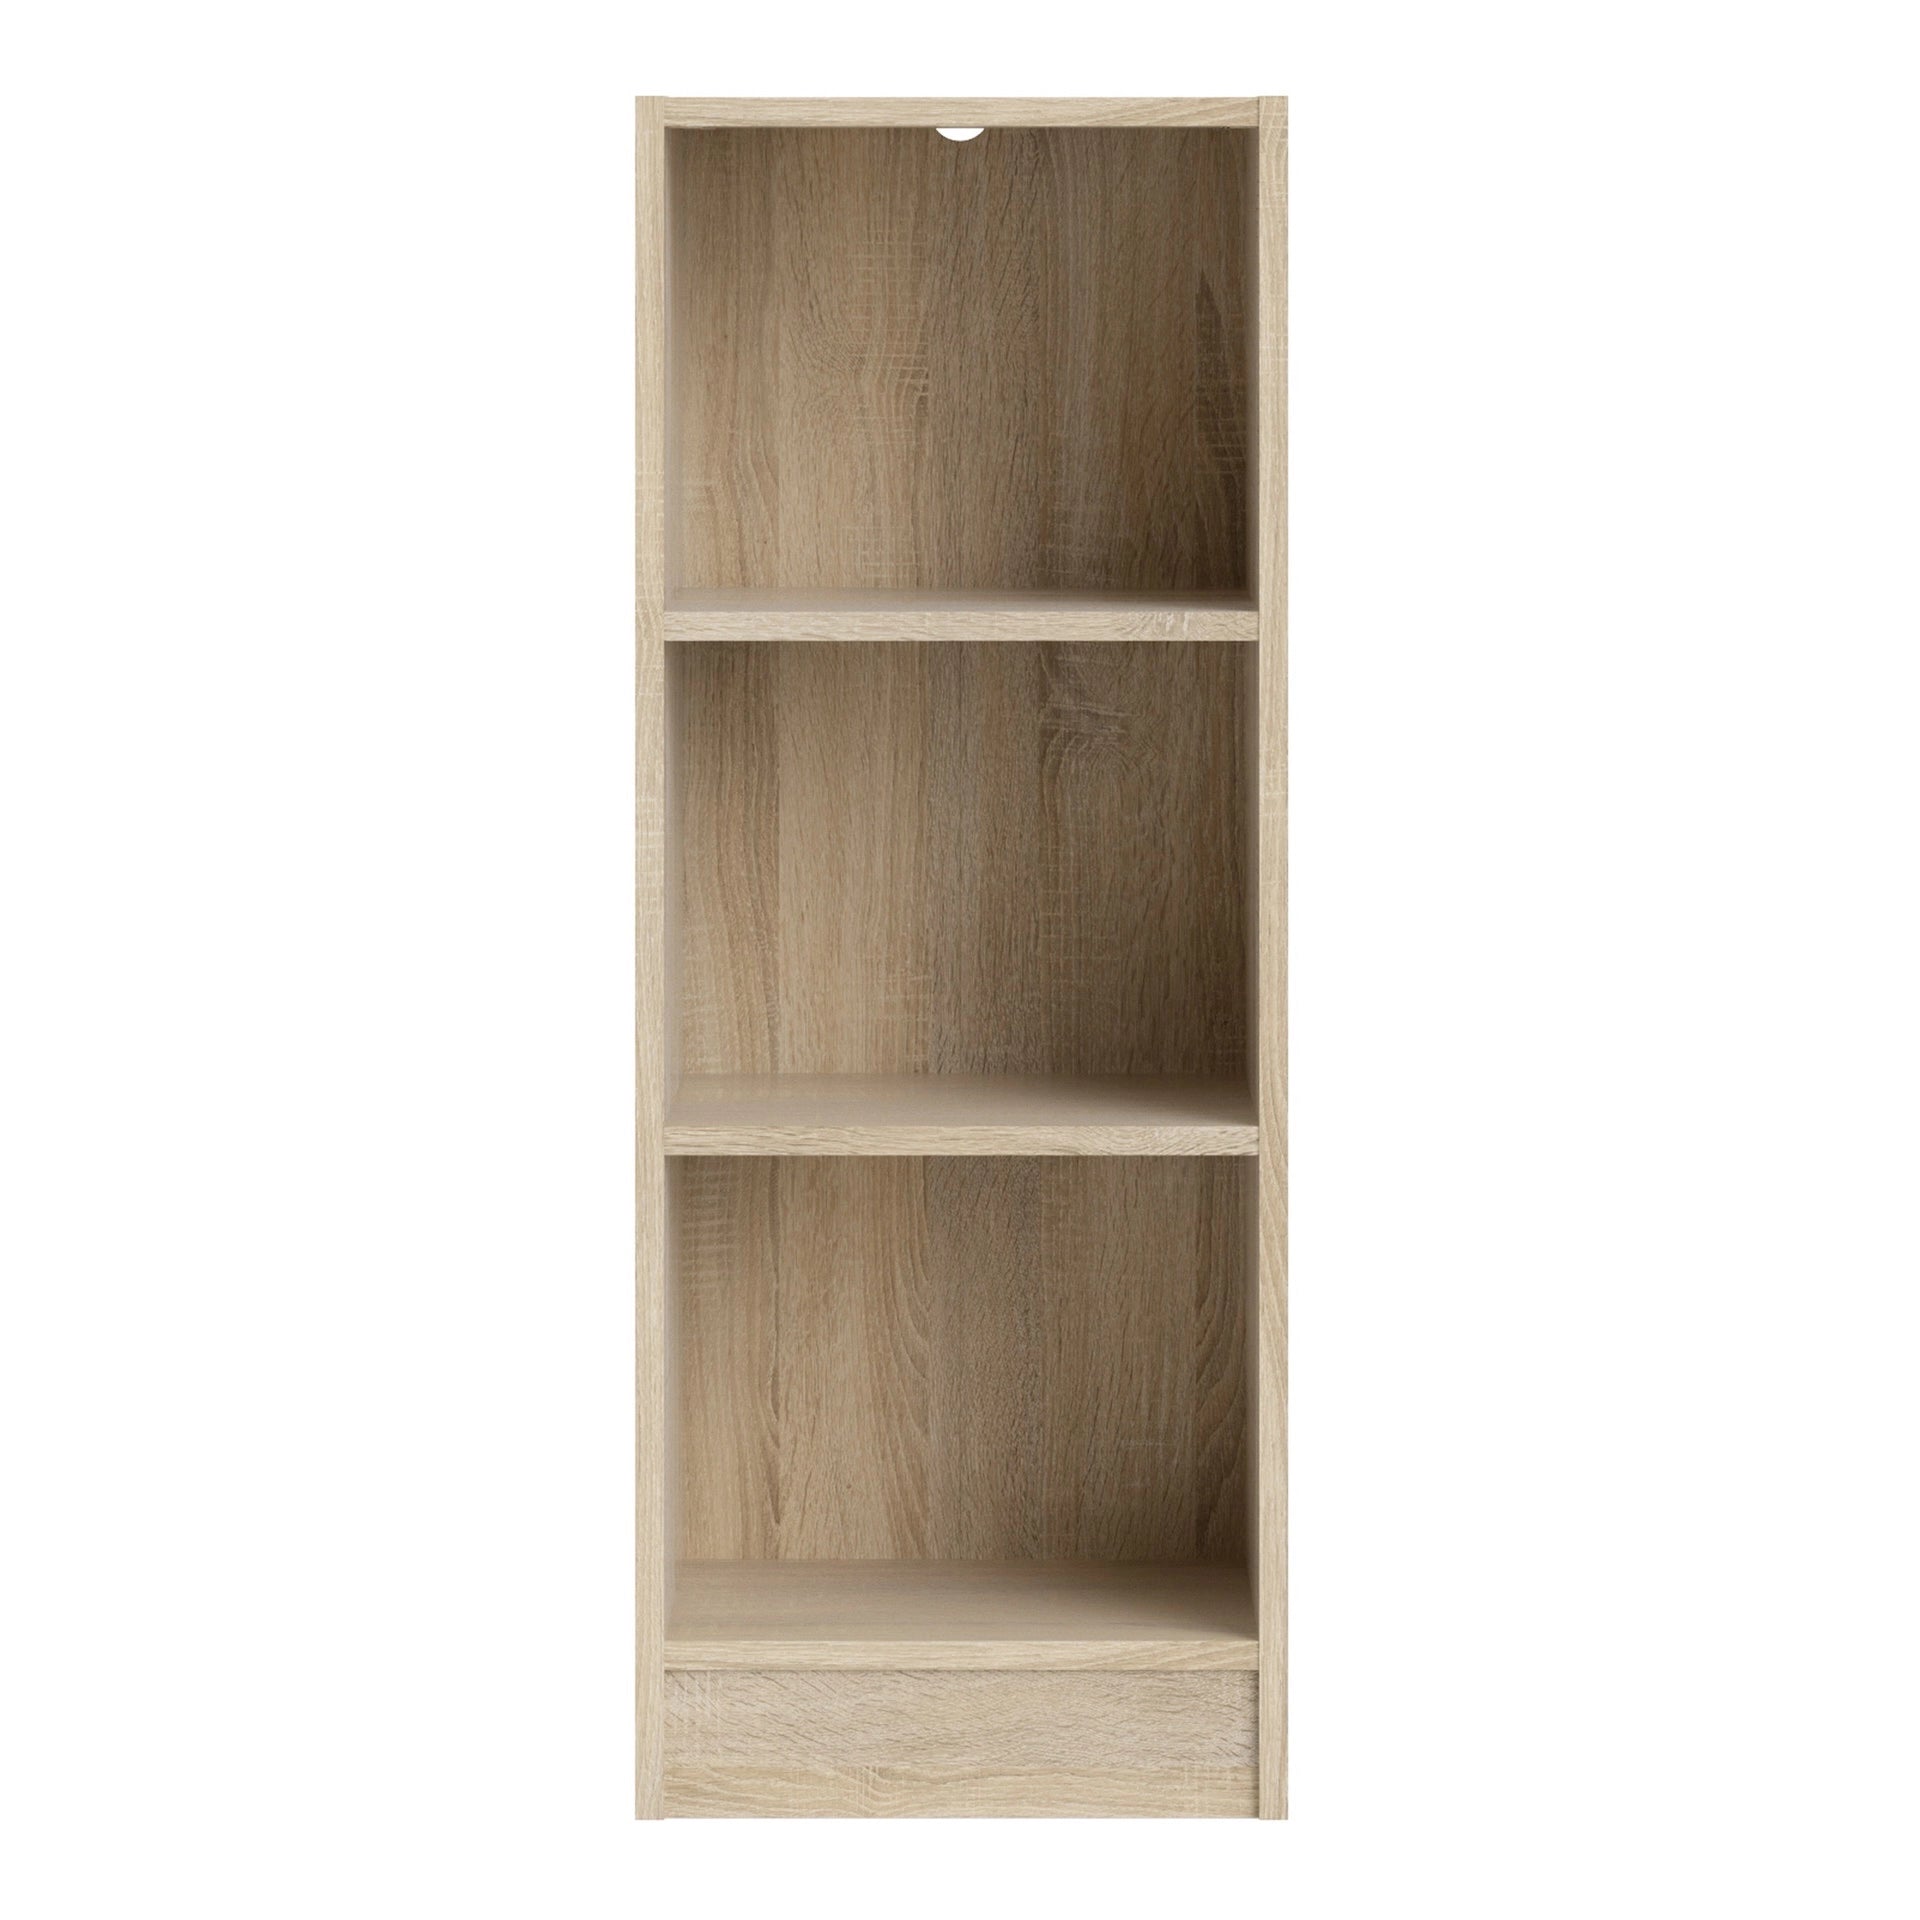 Furniture To Go Basic Low Narrow Bookcase (2 Shelves) in Oak